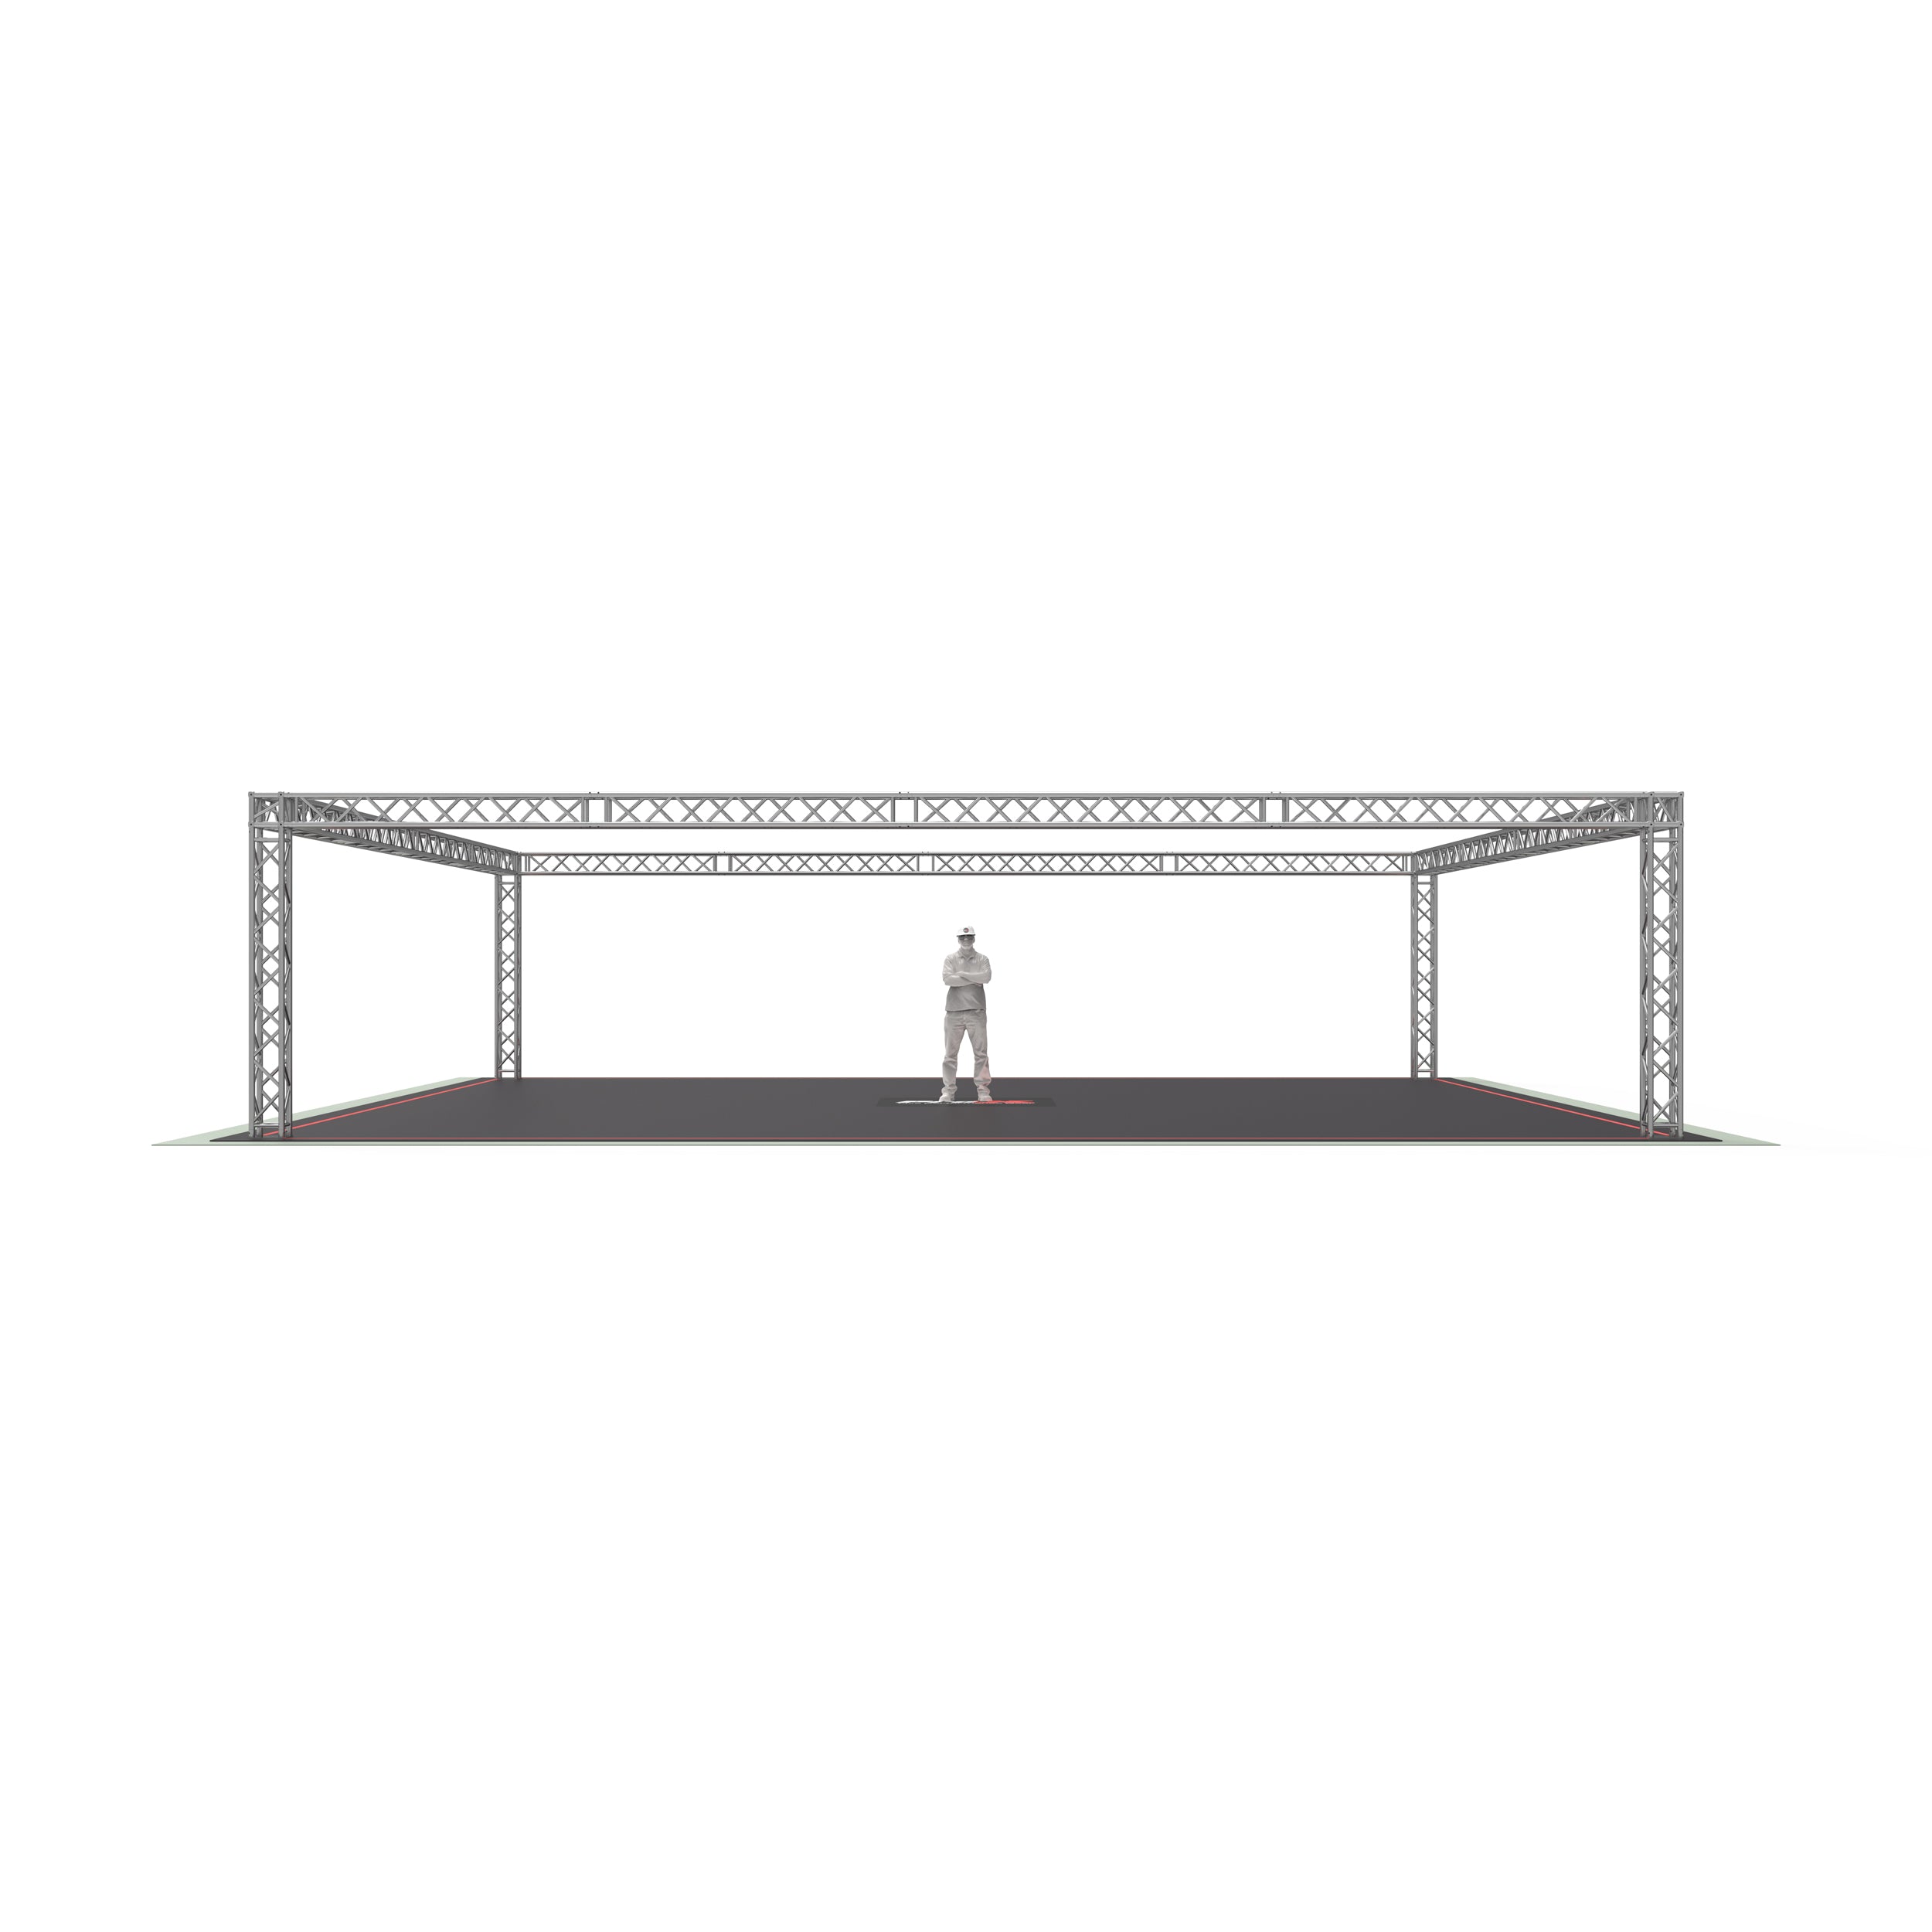 Pro X F34 Trade Show Display Booth Truss System – 40 x 20 x 9 Ft. XTP-40209